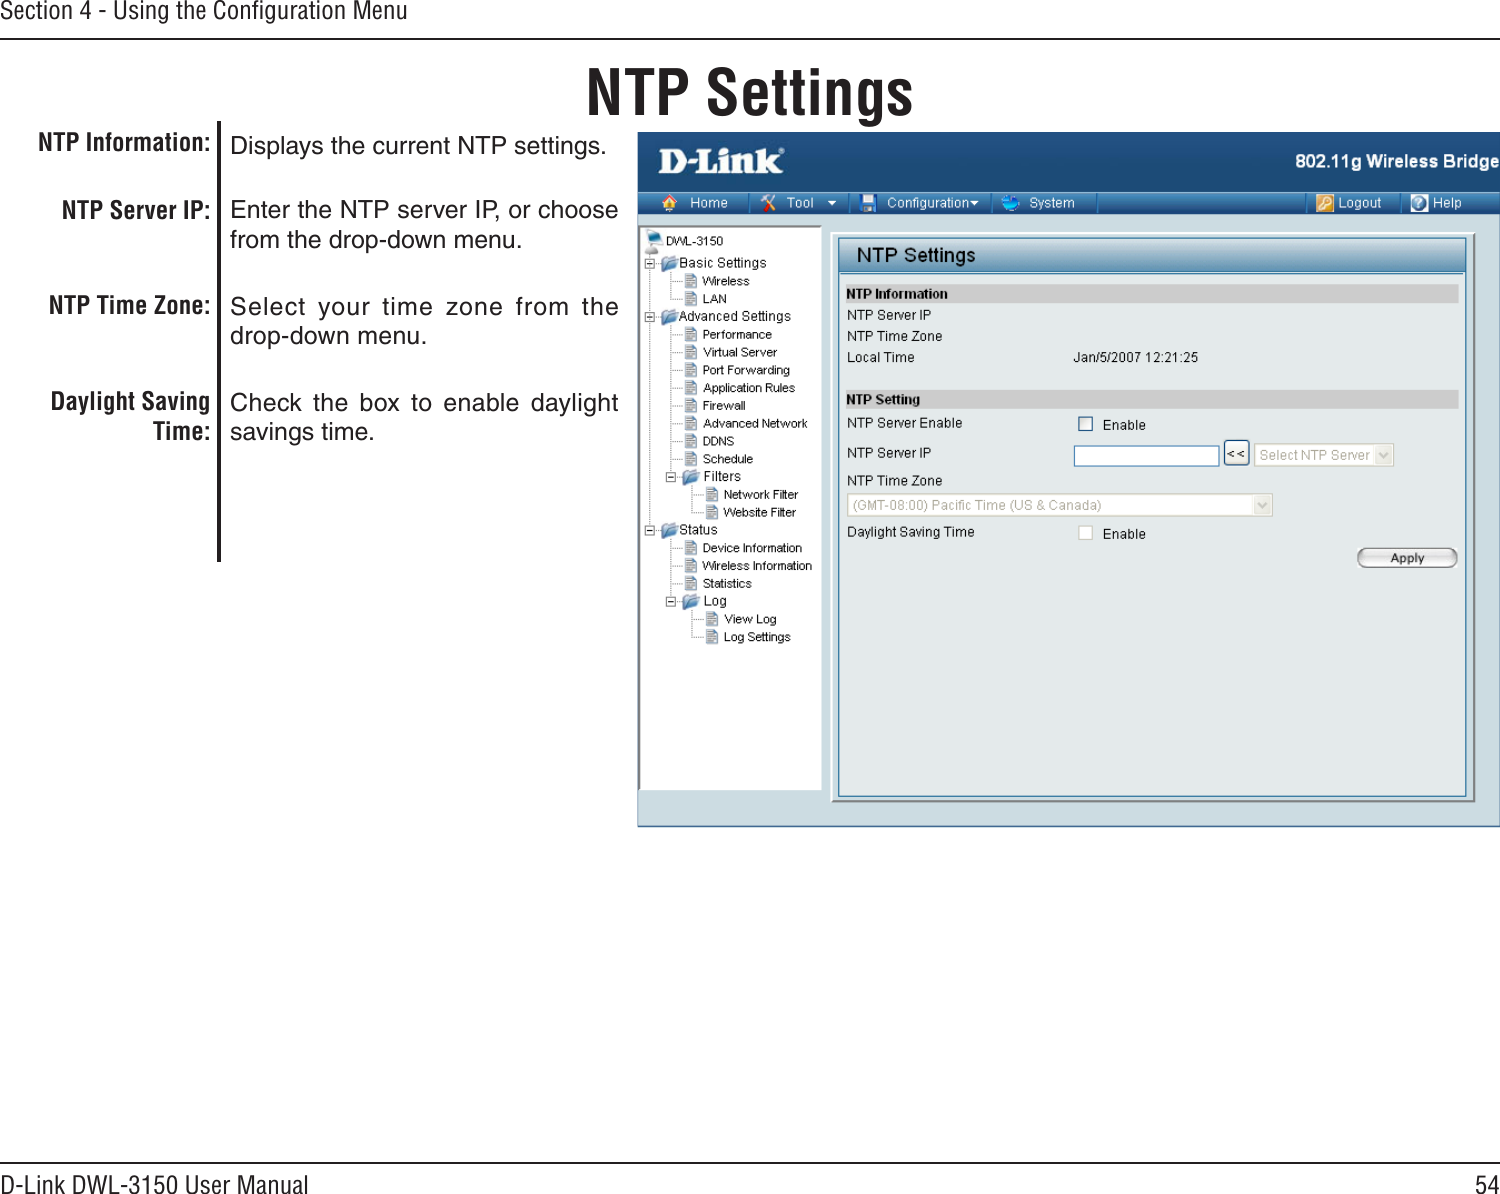 54D-Link DWL-3150 User ManualSection 4 - Using the Conﬁguration MenuNTP SettingsDisplays the current NTP settings.Enter the NTP server IP, or choose from the drop-down menu.Select  your  time  zone  from  the drop-down menu.Check the  box  to  enable  daylight savings time.NTP Information:NTP Server IP:NTP Time Zone:Daylight Saving Time: